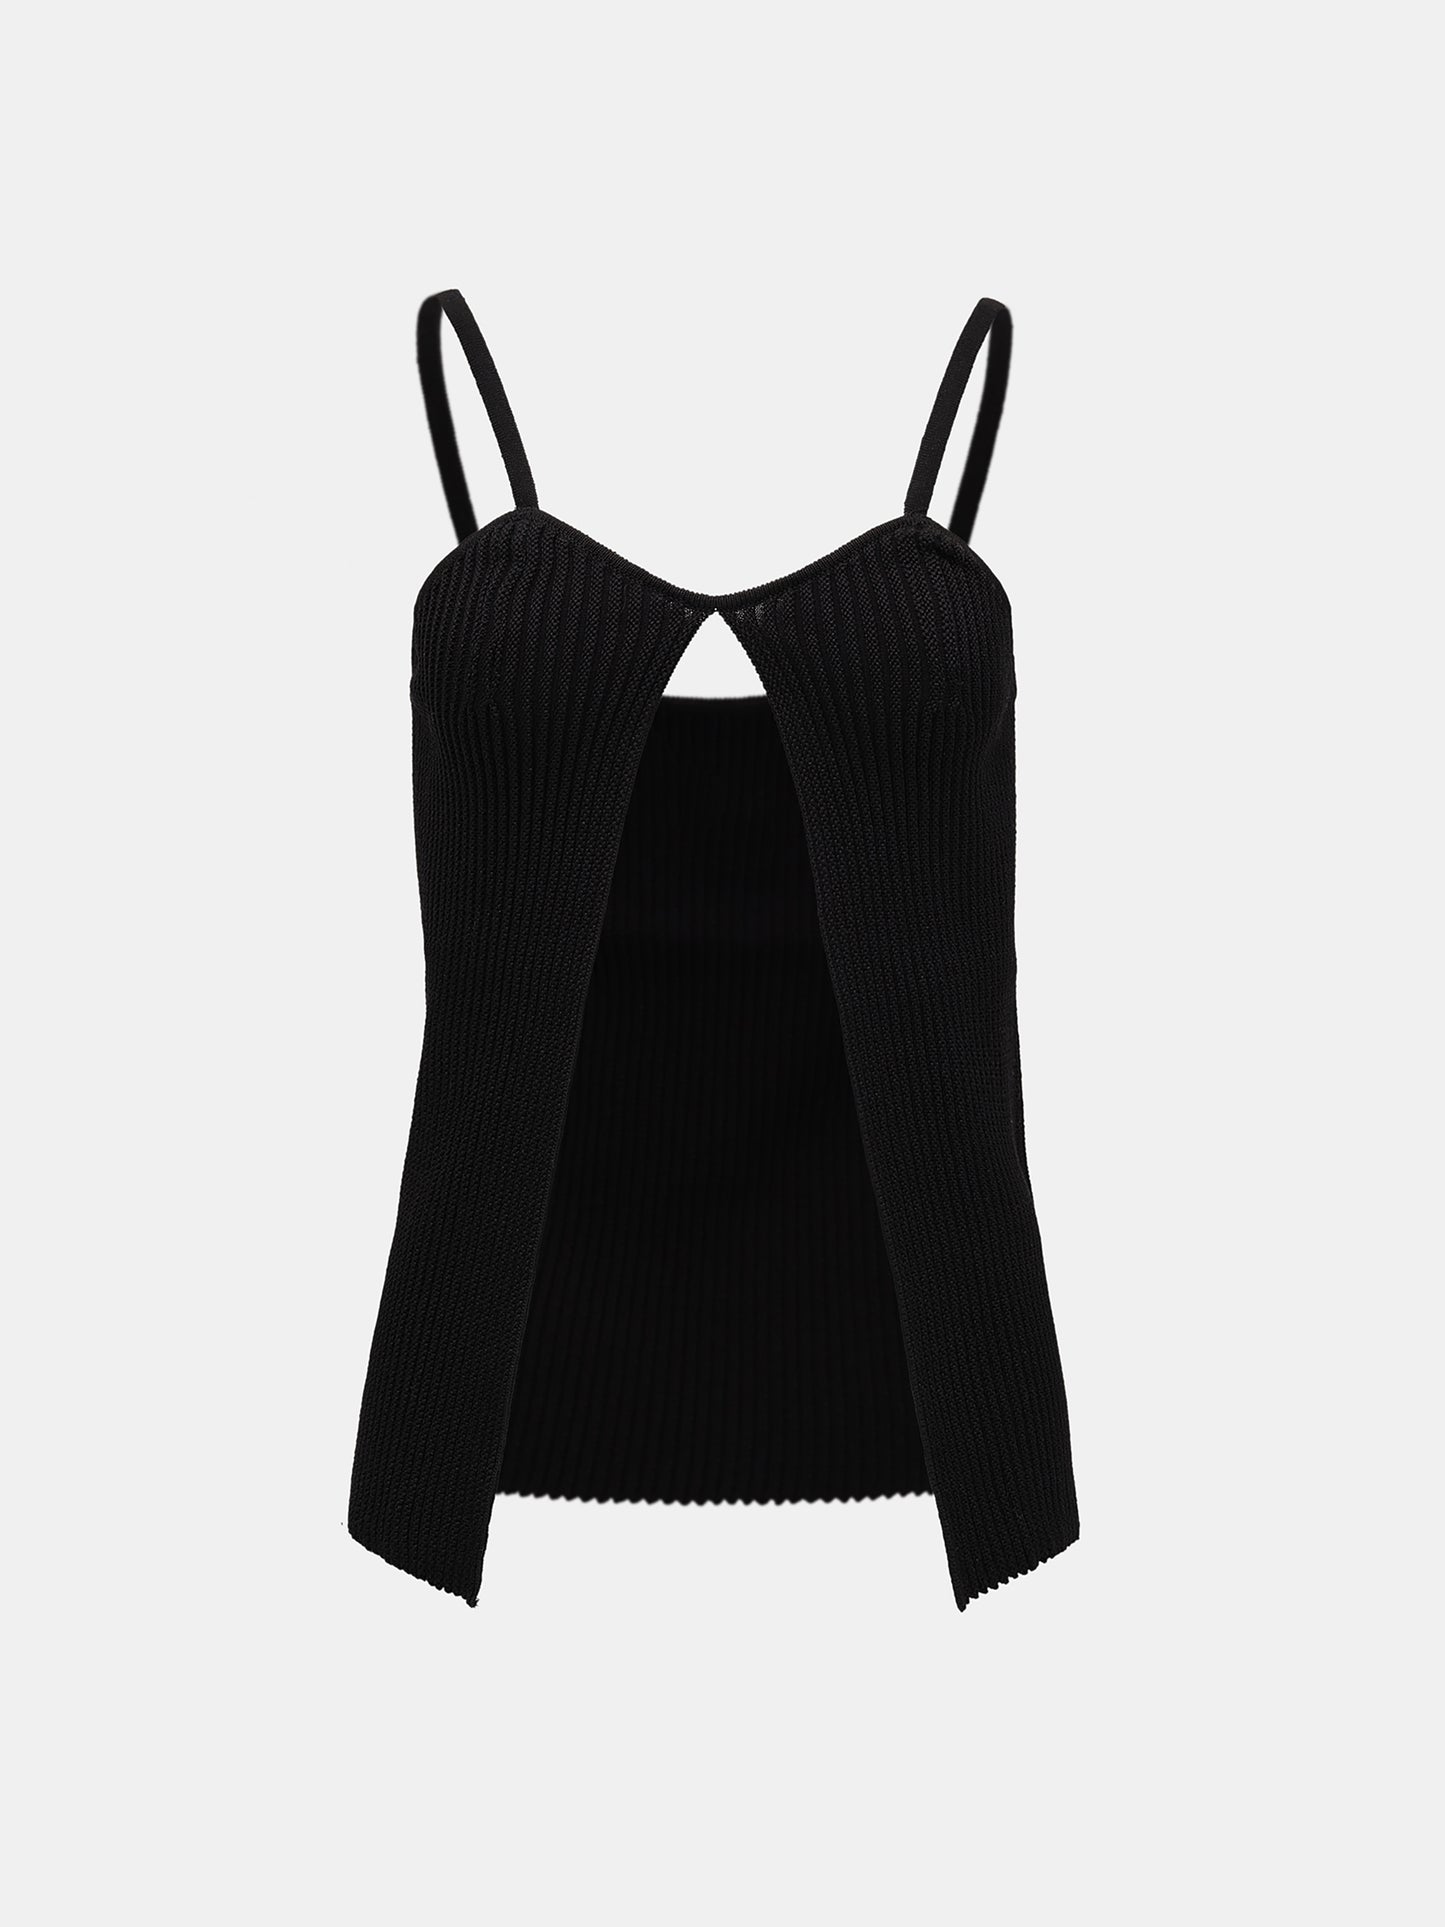 Wide Cut-Out Knit Top, Black – SourceUnknown